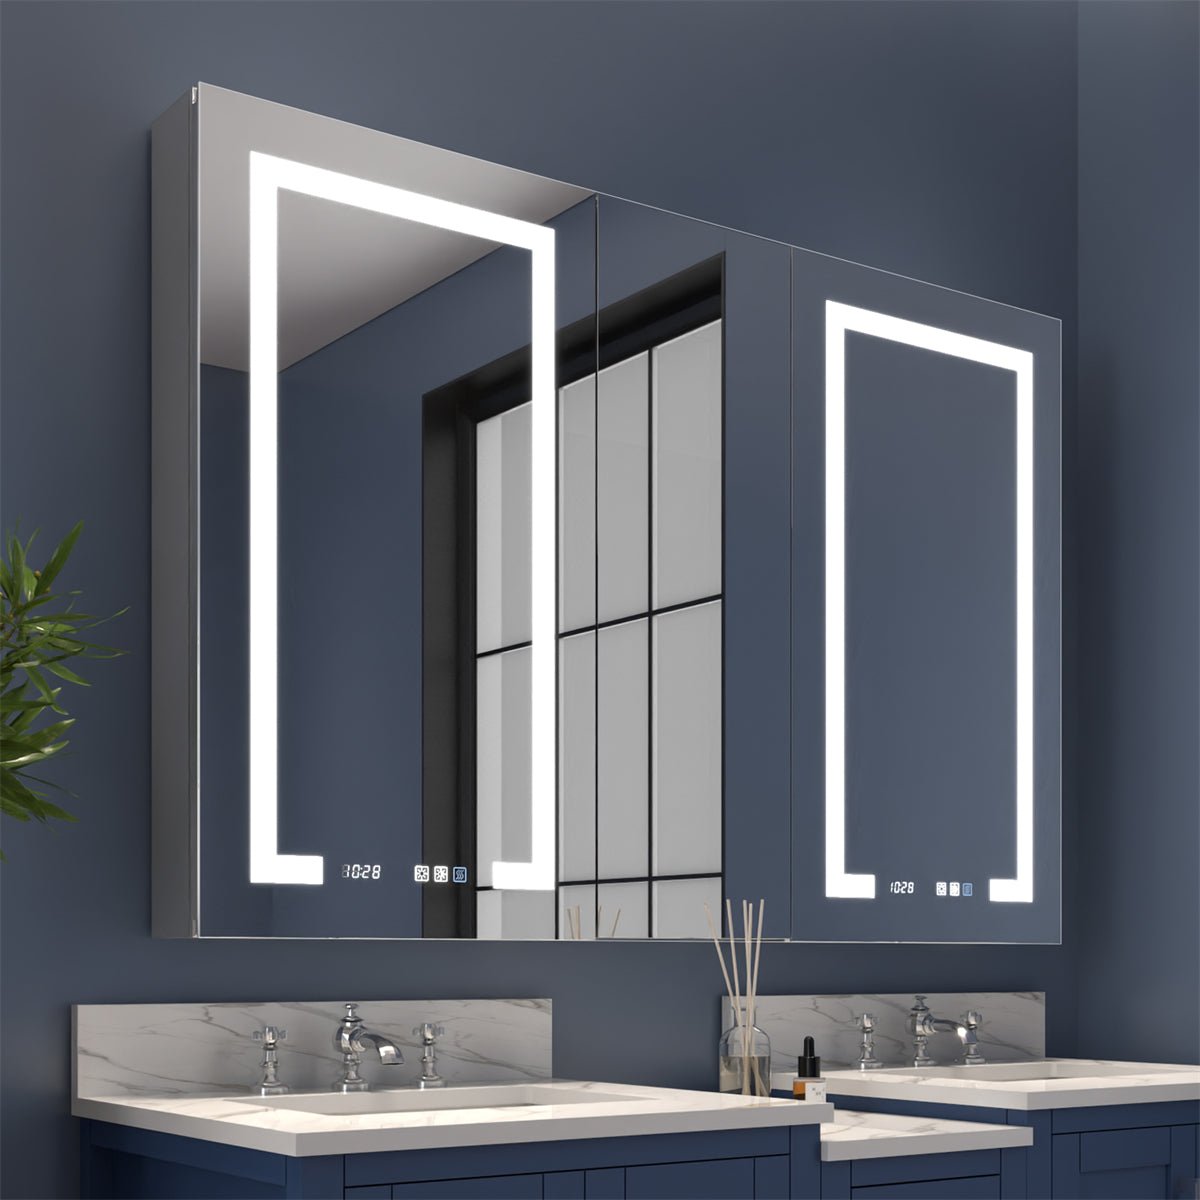 Boost-M2 52" W x 36" H Bathroom Light Narrow Medicine Cabinets with Vanity Mirror Recessed or Surface - ExBriteUSA